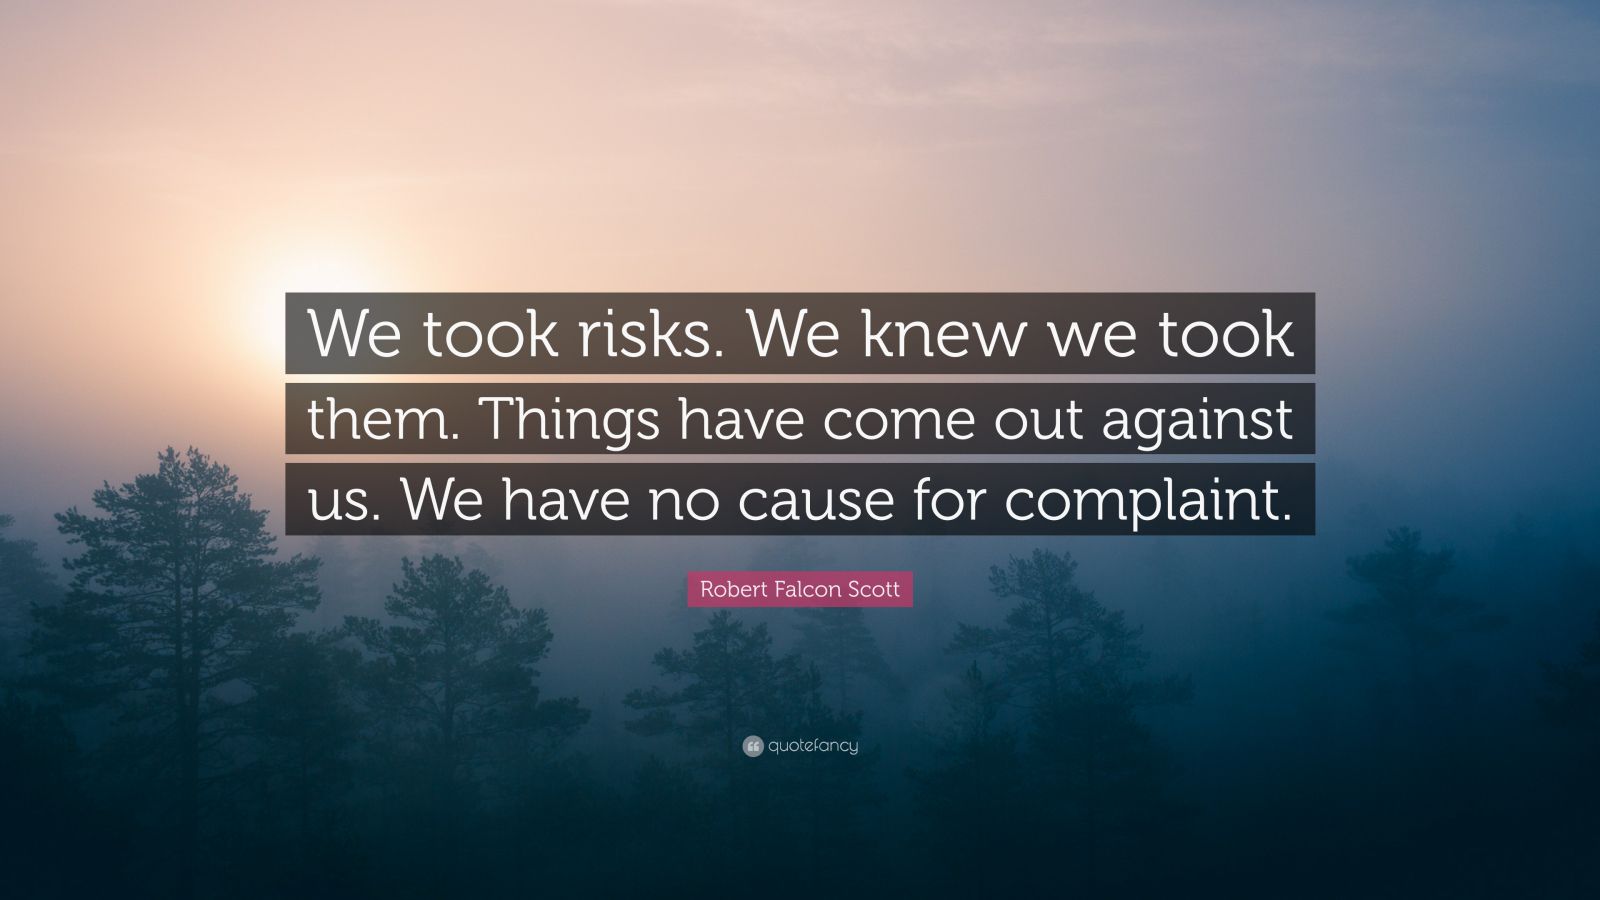 Robert Falcon Scott Quote: "We took risks. We knew we took them. Things have come out against us ...